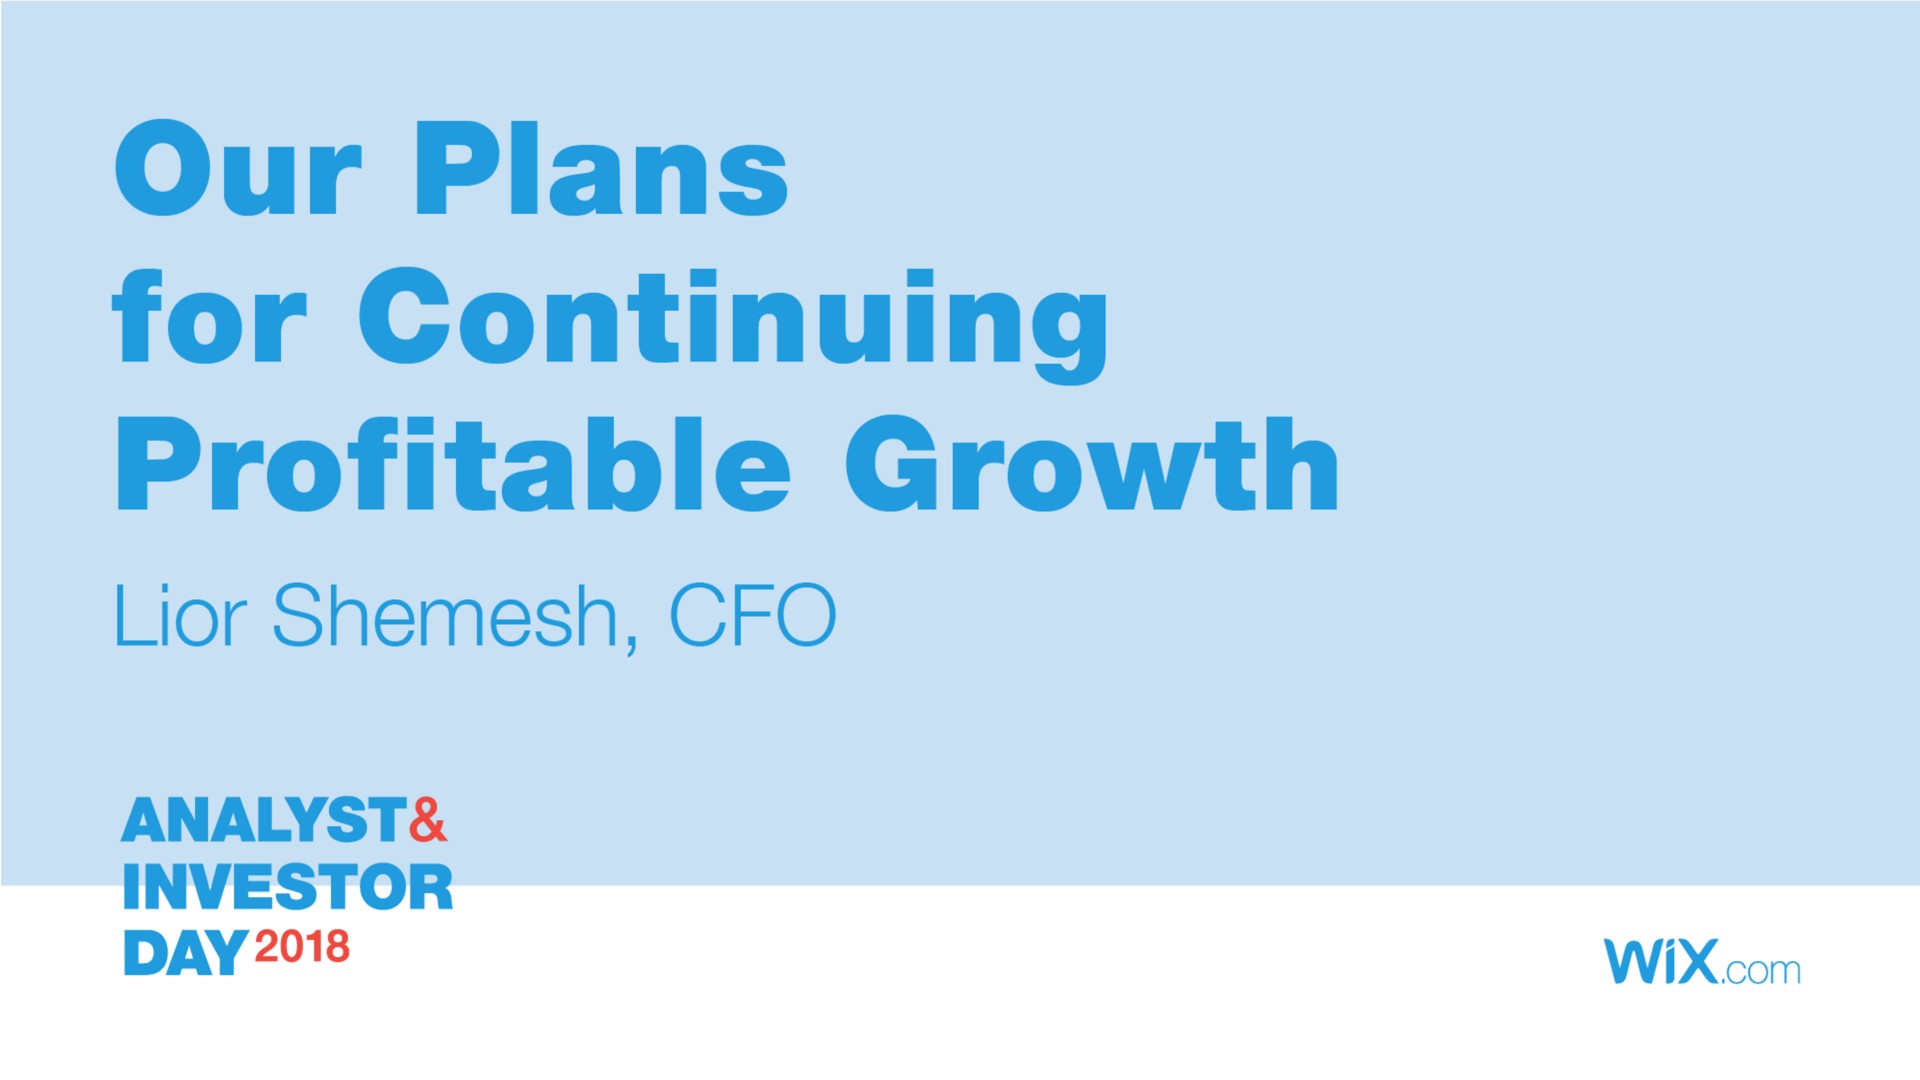 our plans for continuing profitable growth analyst investor day | Wix